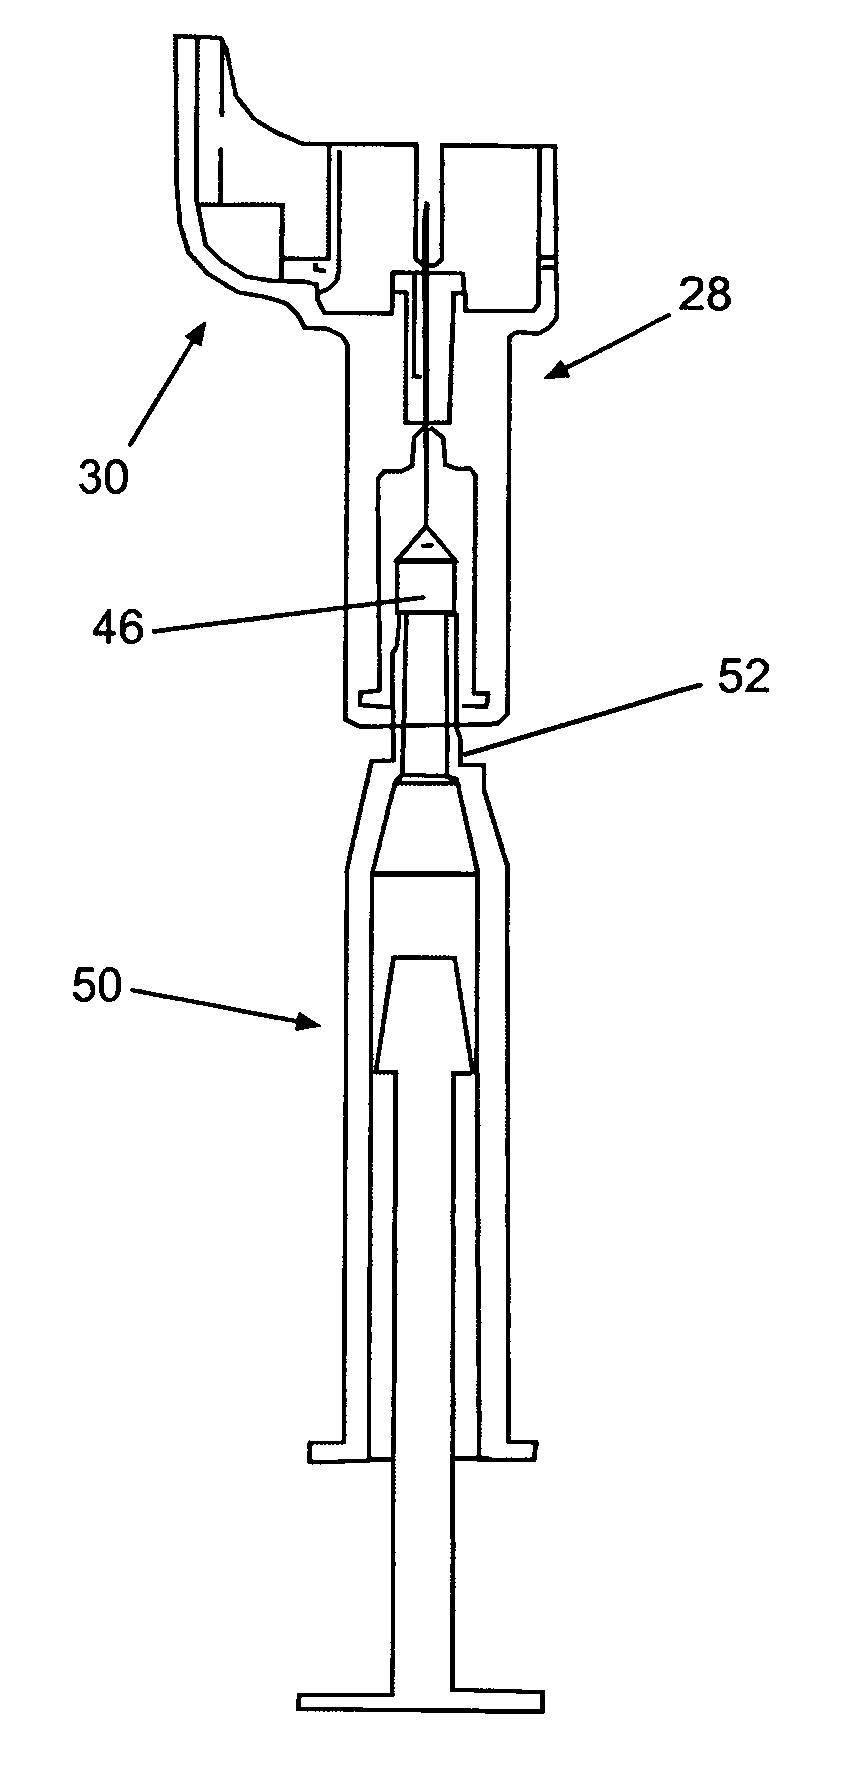 Methods and devices for delivering fluid to a reservoir of a fluid delivery device